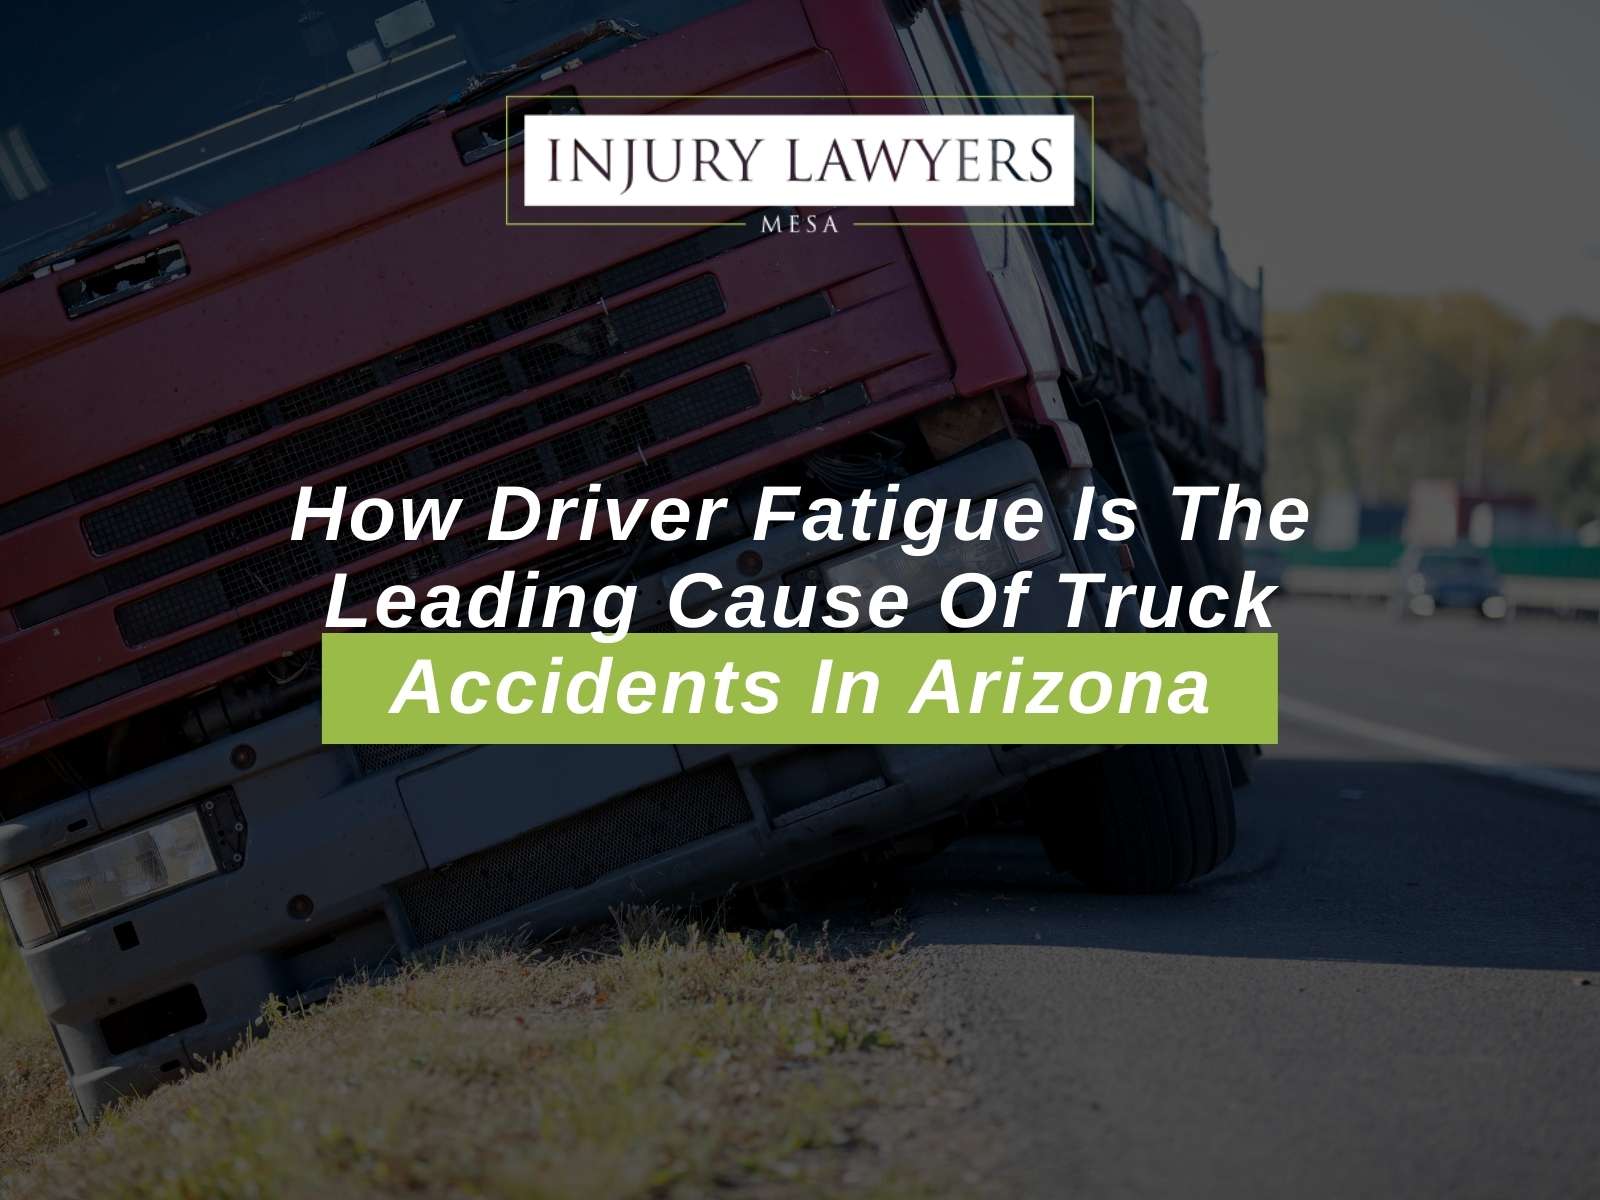 How Driver Fatigue Is The Leading Cause Of Truck Accidents In Arizona